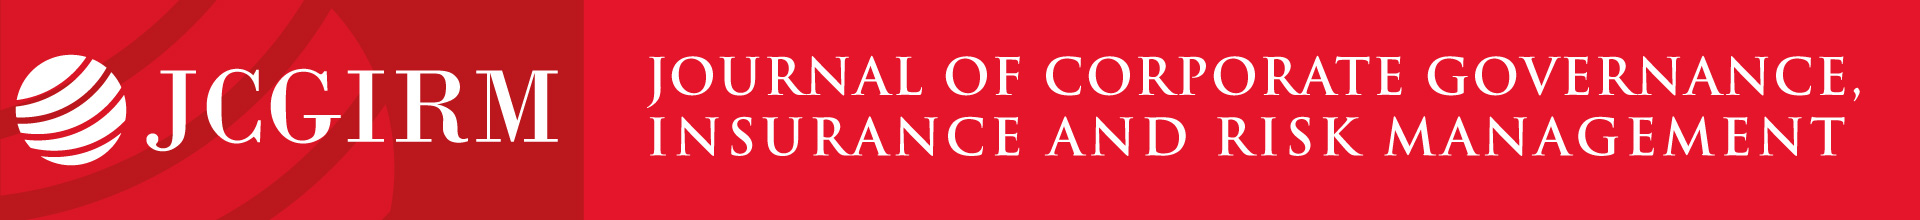 The Journal of Corporate Governance, Insurance, and Risk Management (JCGIRM)